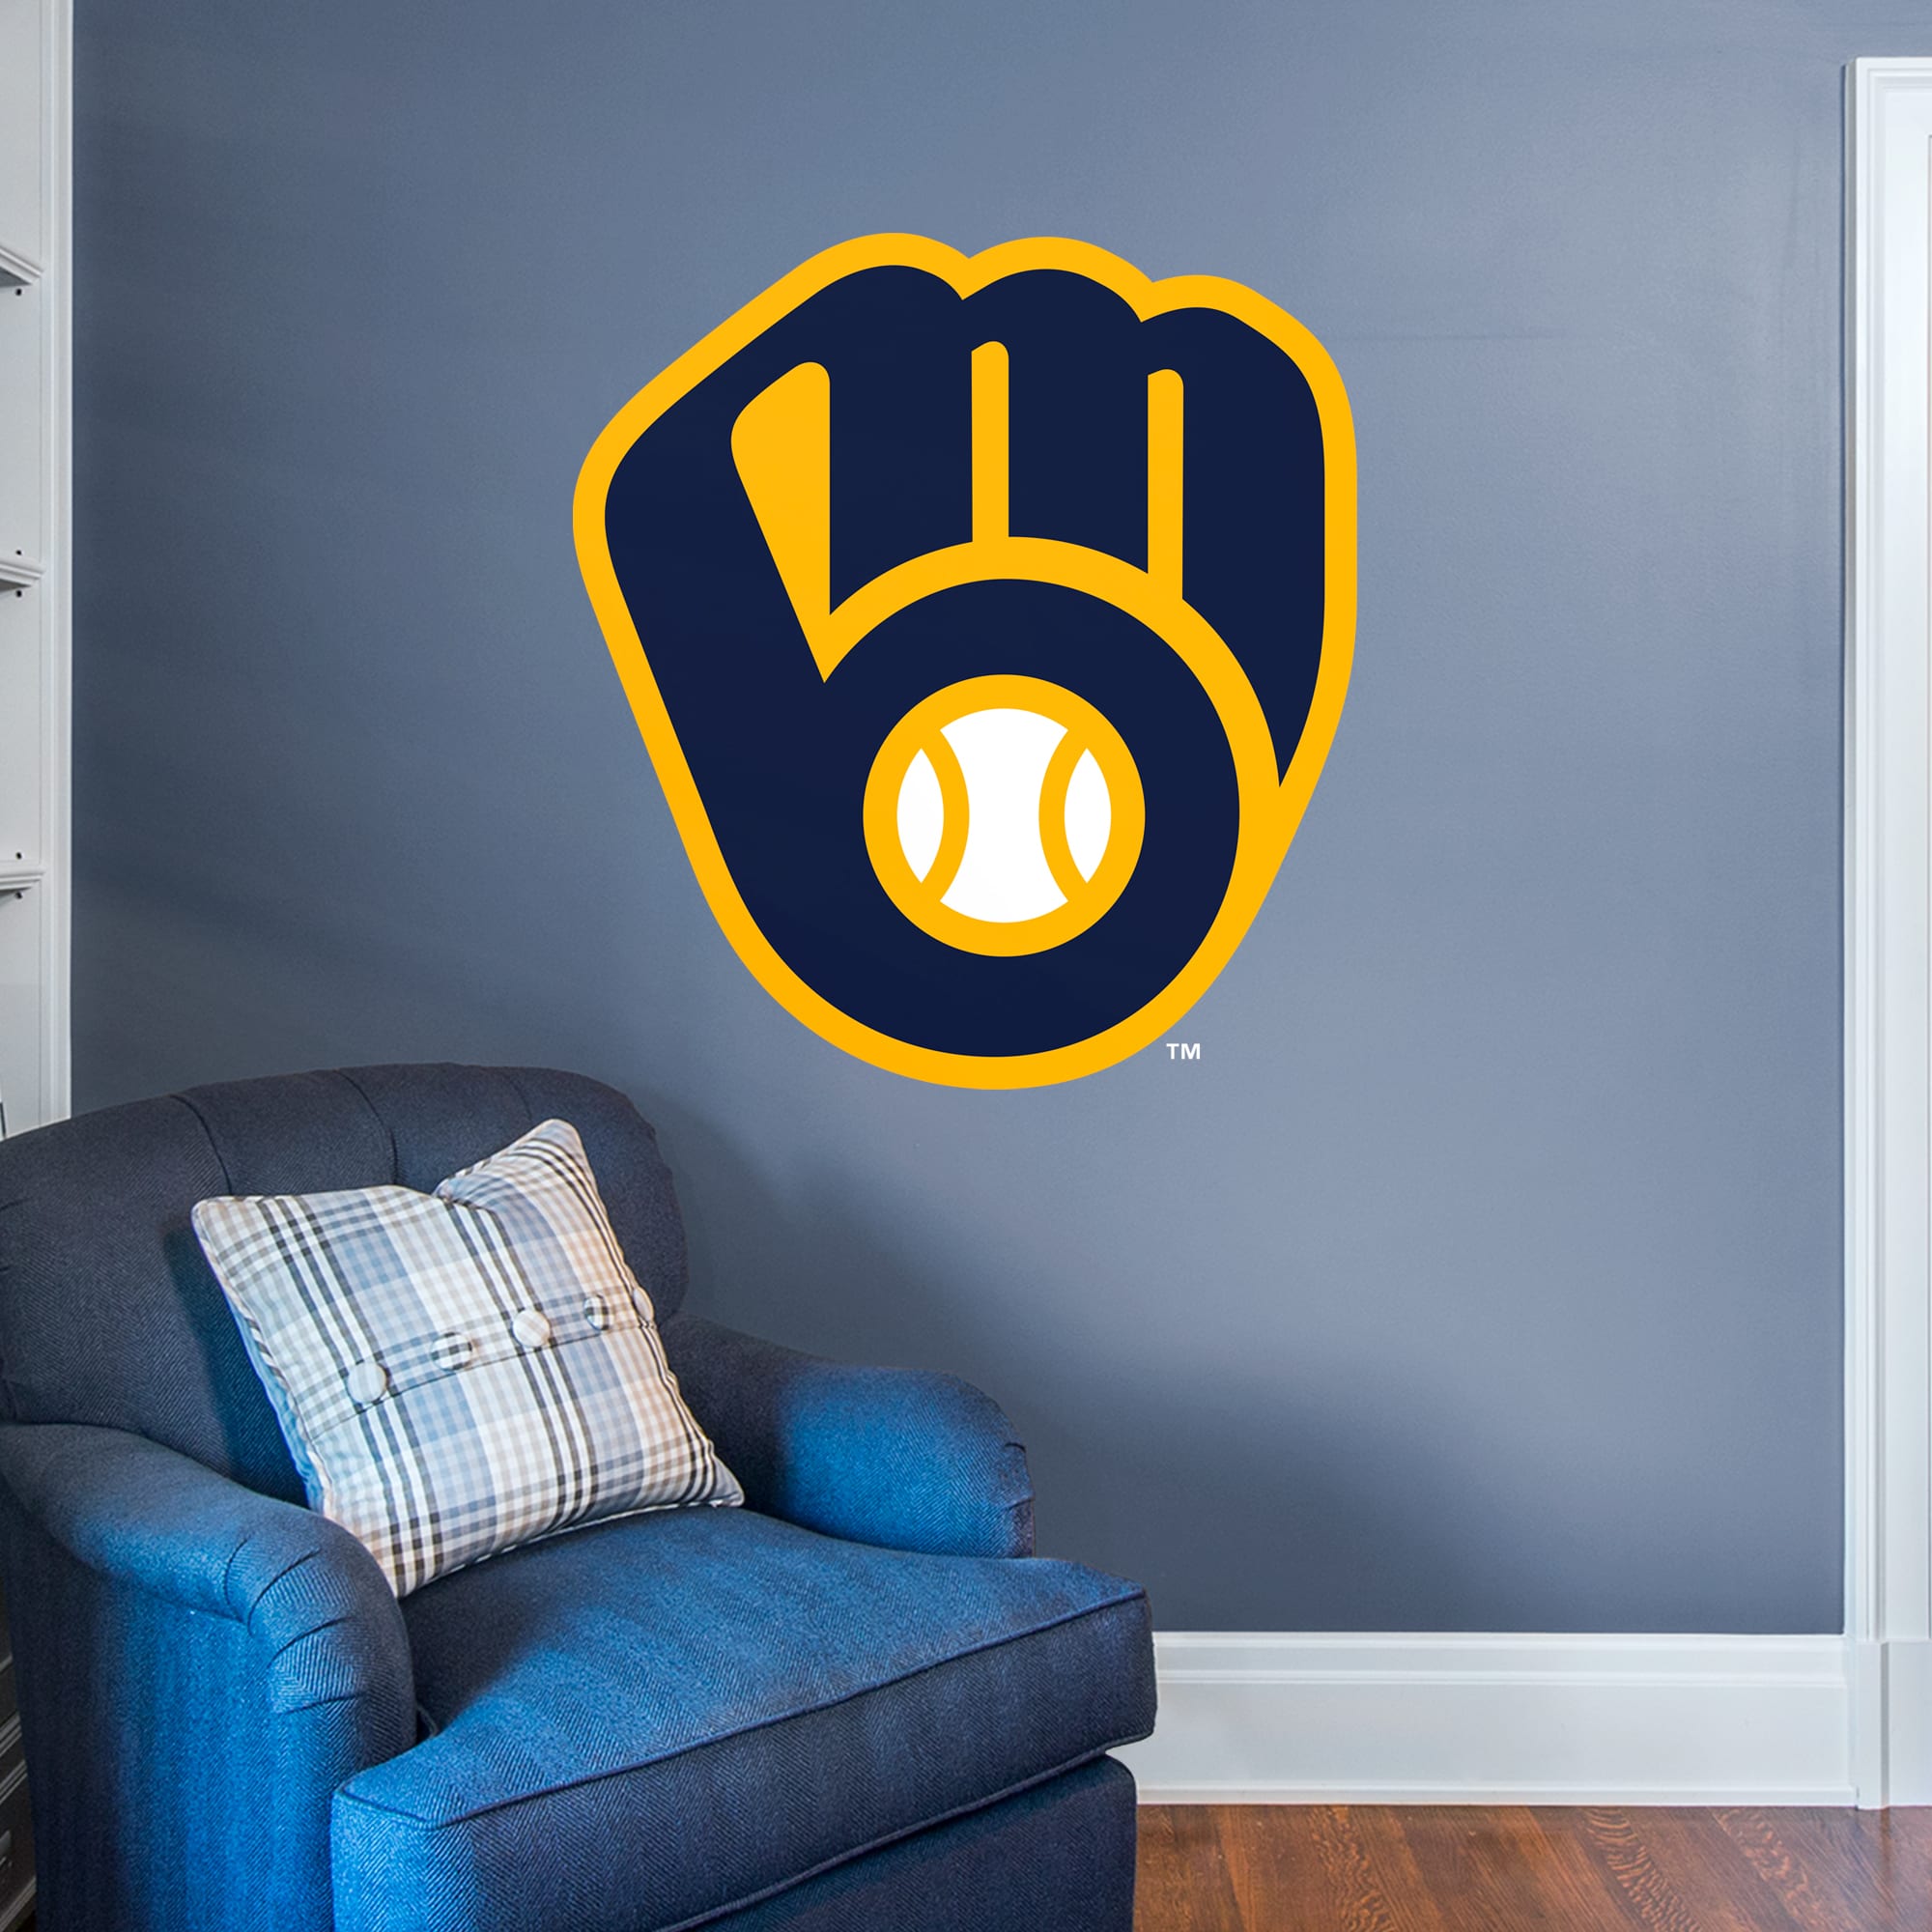 Milwaukee Brewers: Cap Logo - Officially Licensed MLB Removable Wall Decal Giant Logo (38.5"W x 42"H) by Fathead | Vinyl